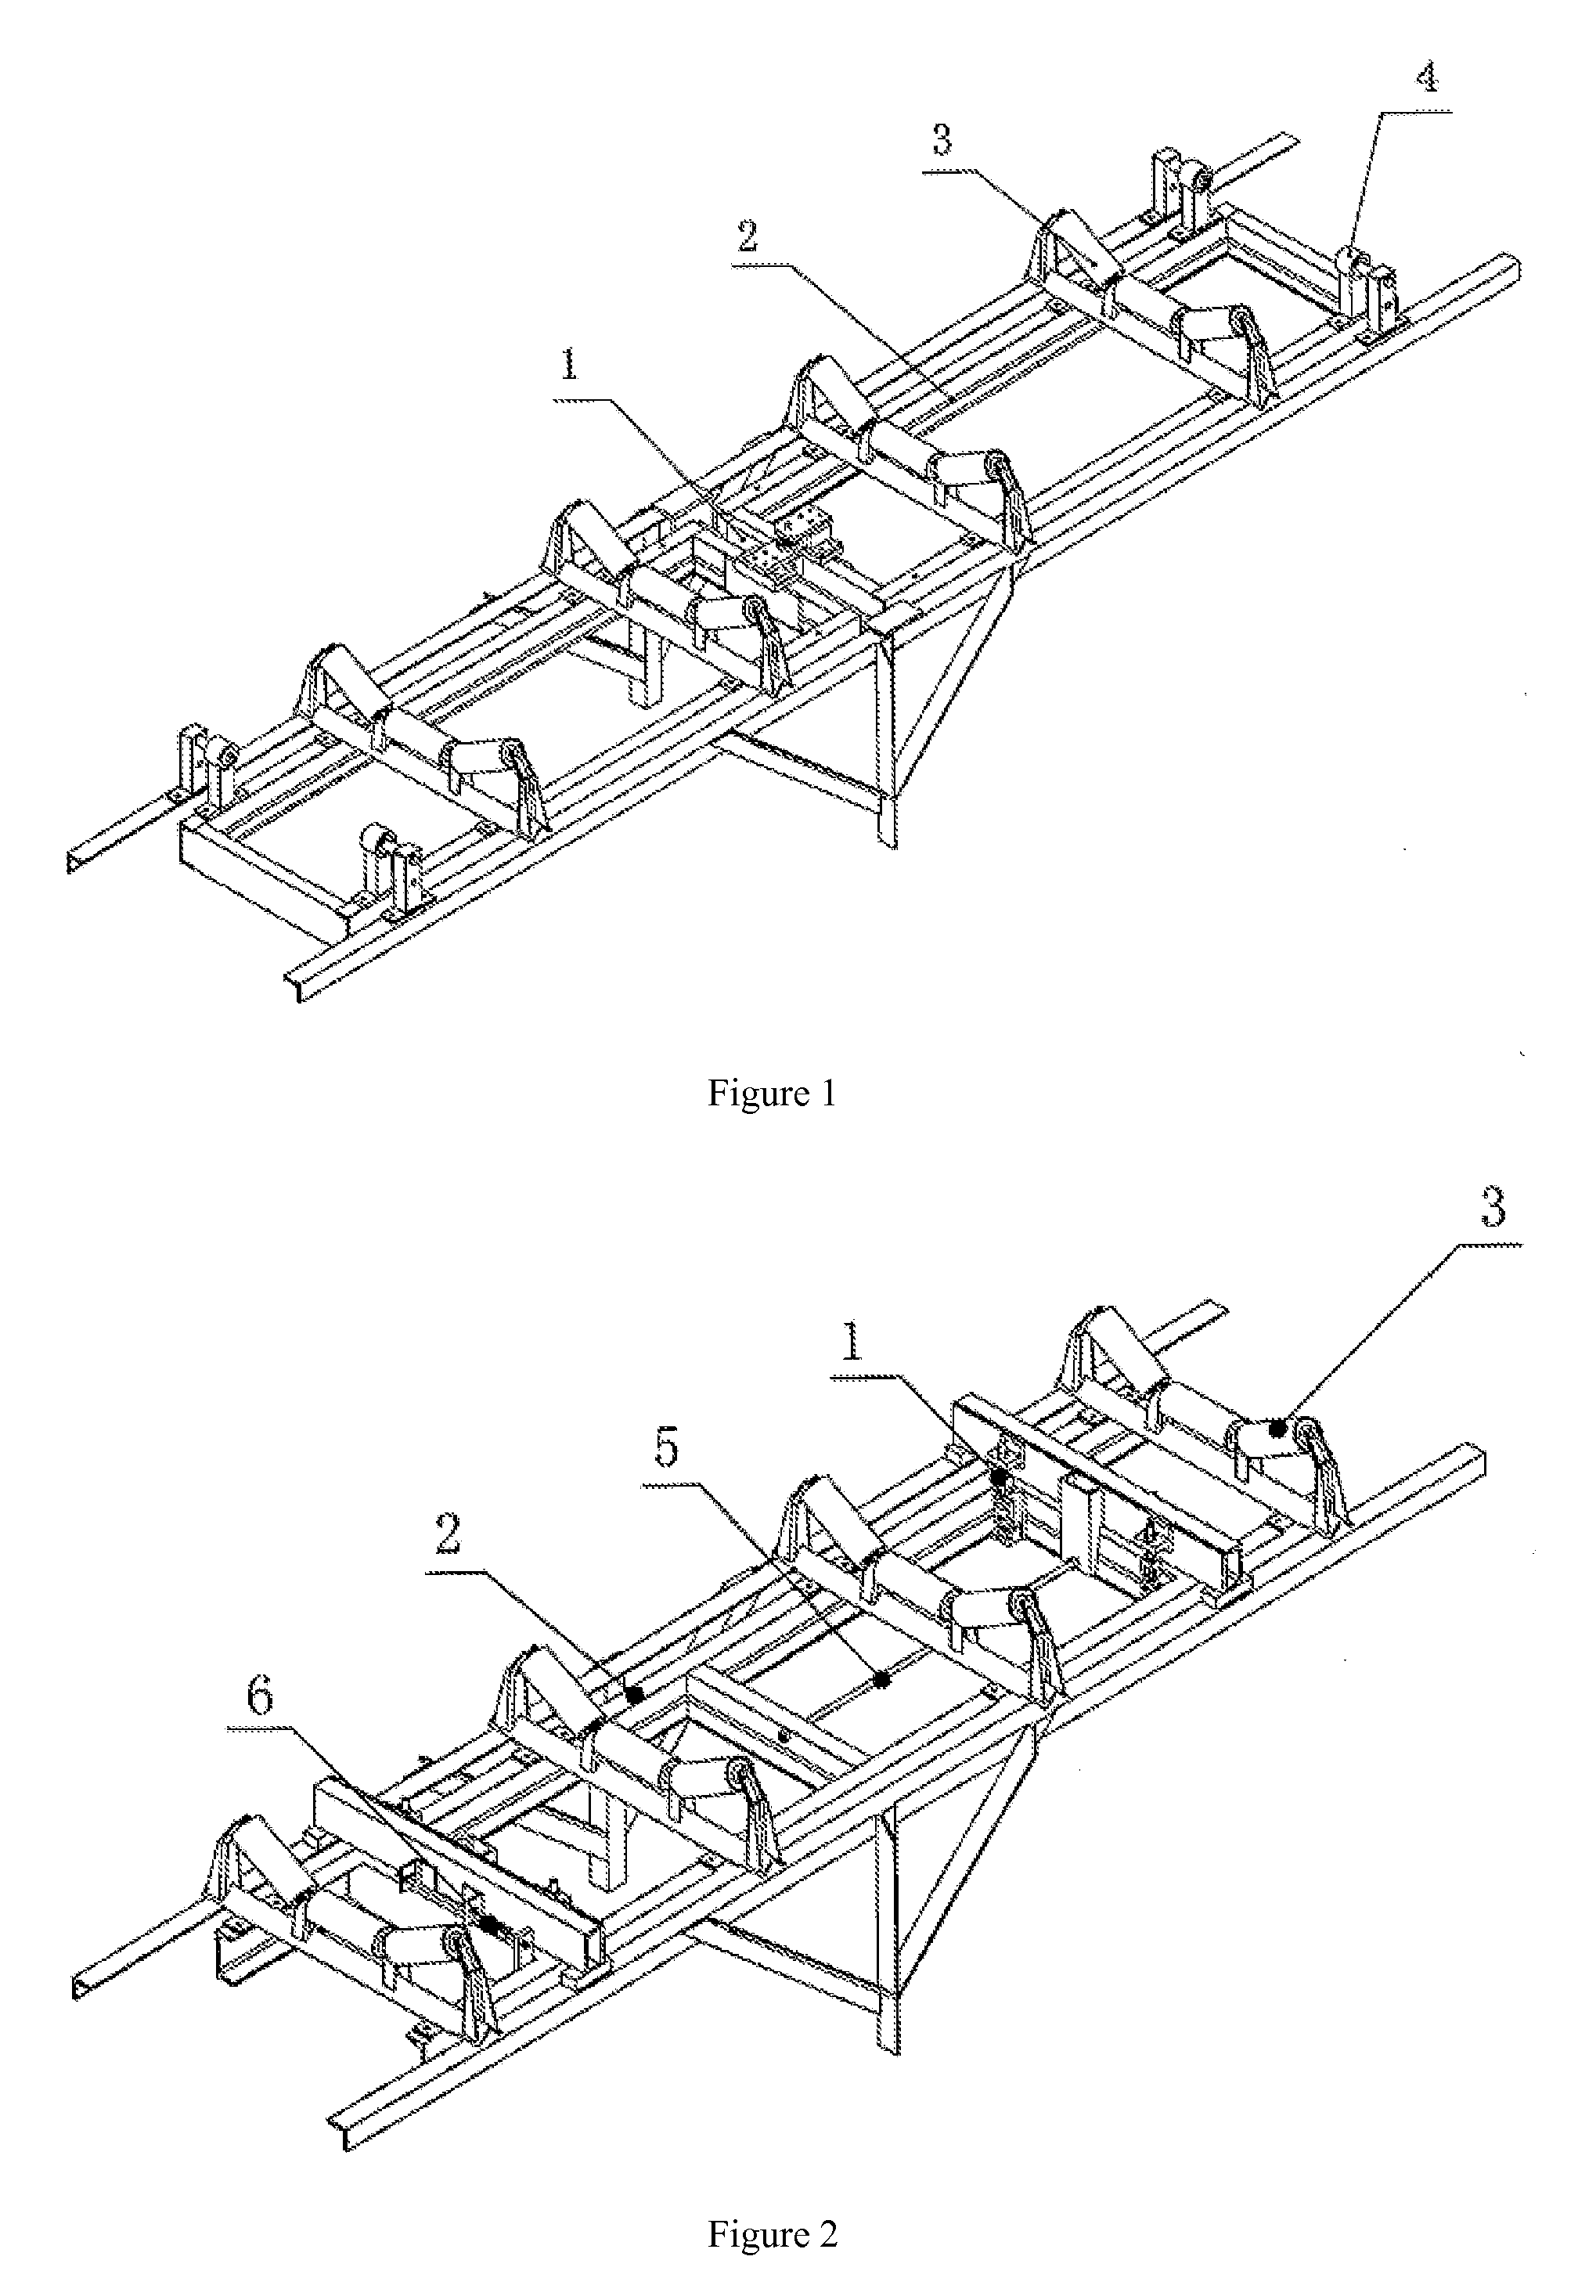 High Precision Belt Weighing Array System for Dispersed Material